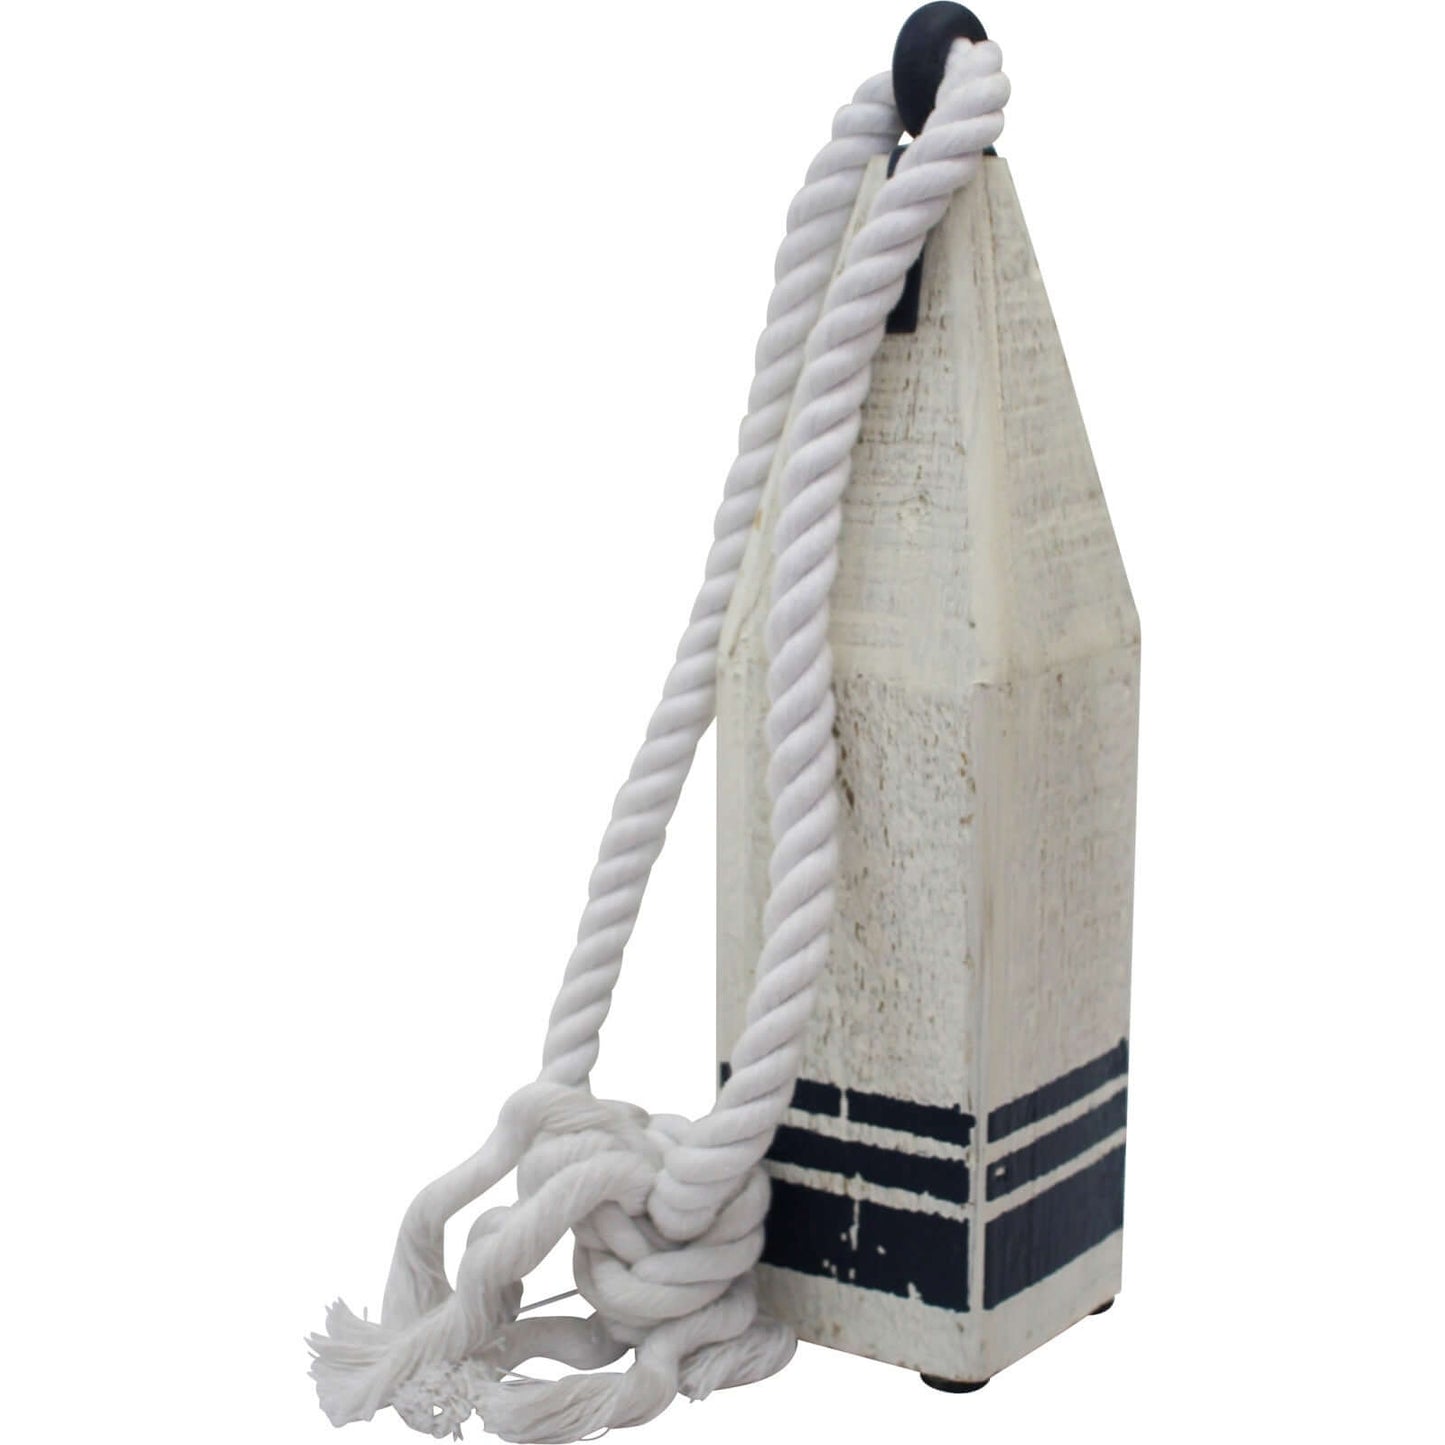 Buoy Nautical Boat Decoration - The Renmy Store